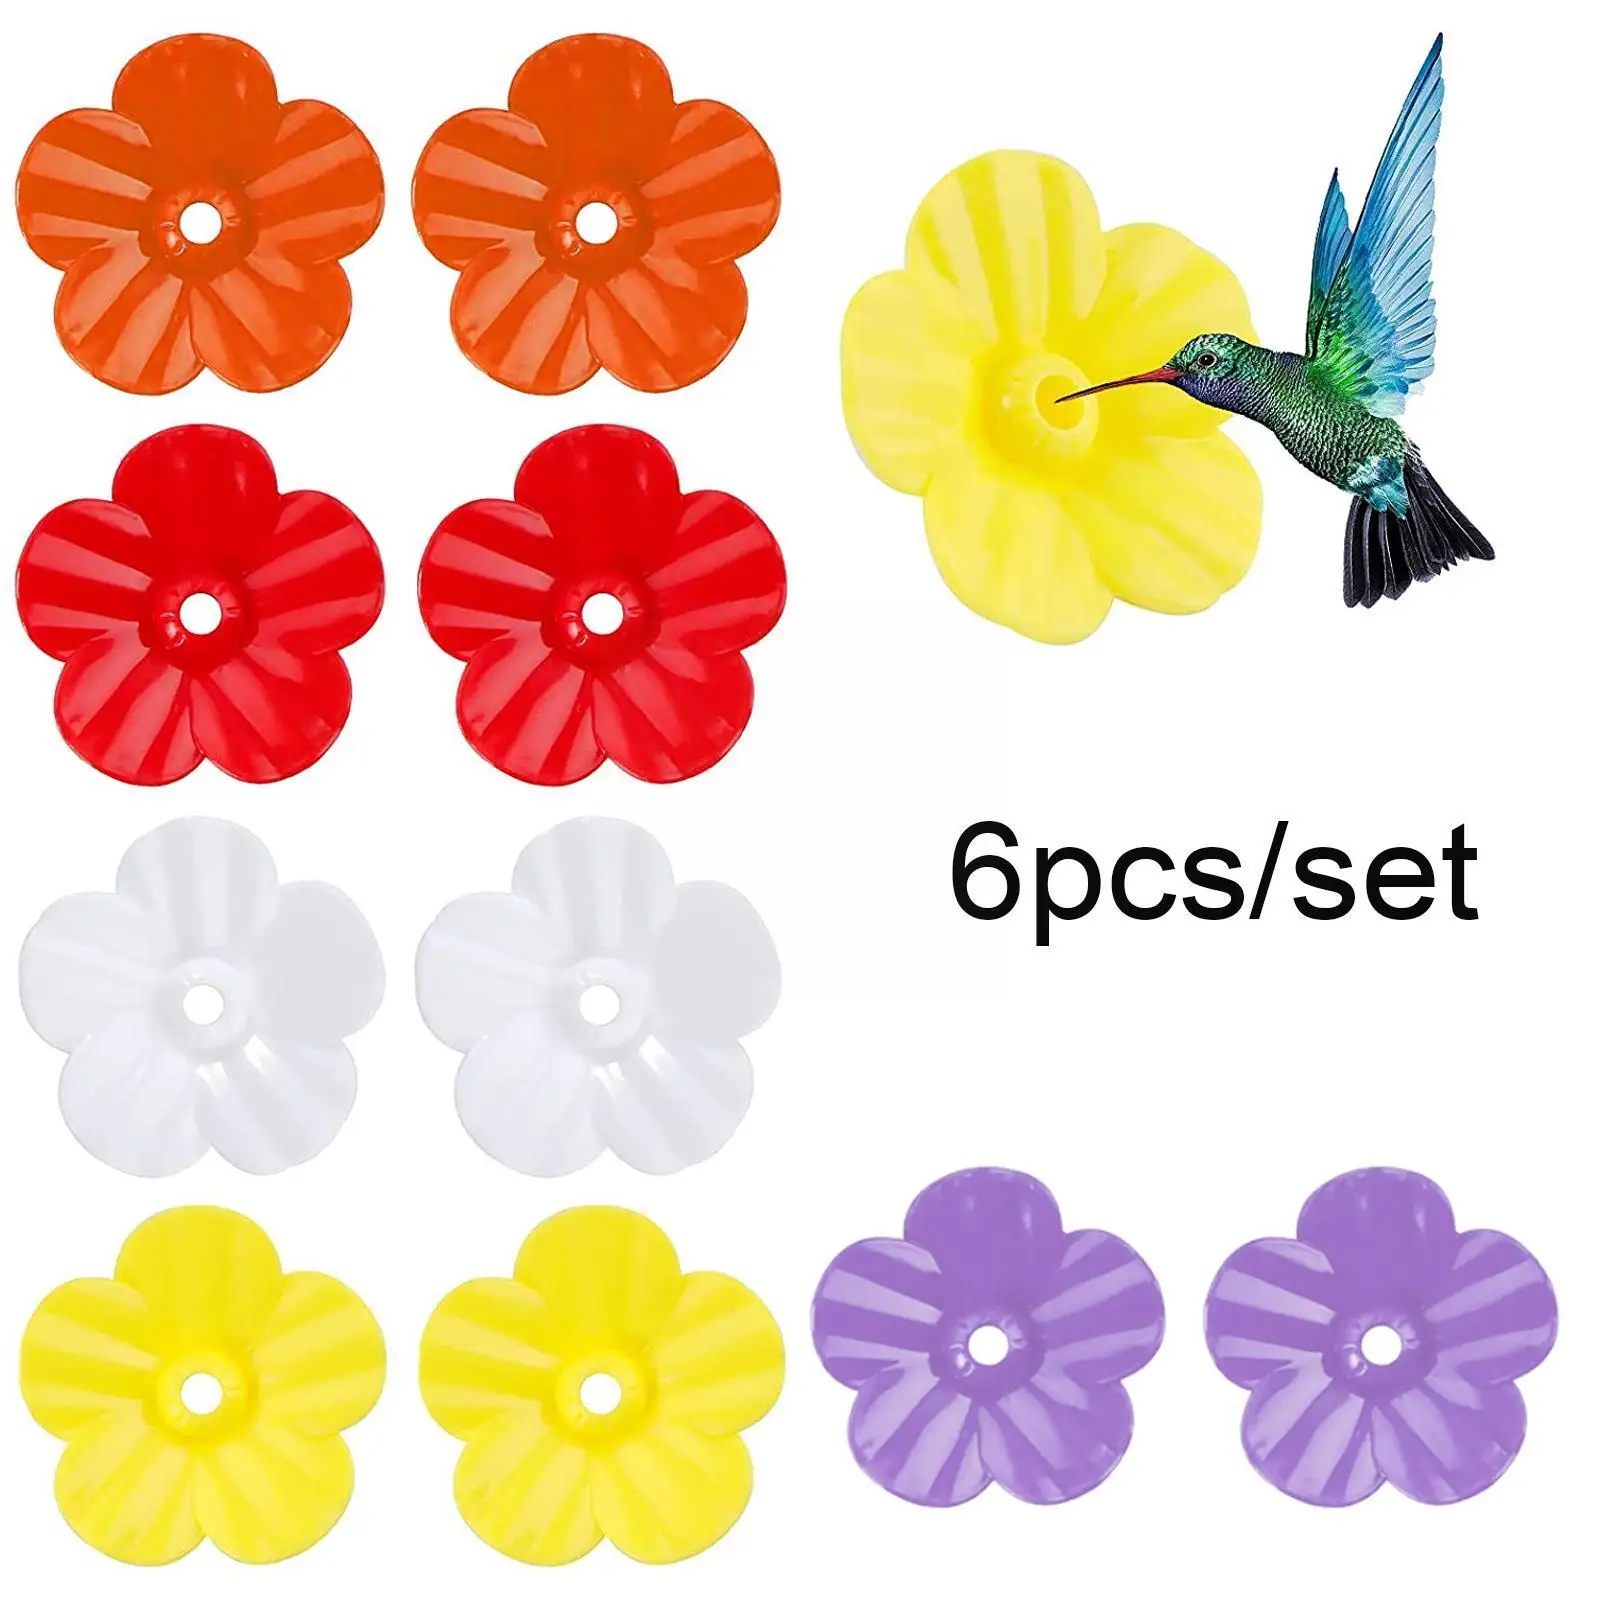 Flowers Outdoor Plastic Feeding Ports Replacement Parts For Feeder Hanging Use Supply G2m8